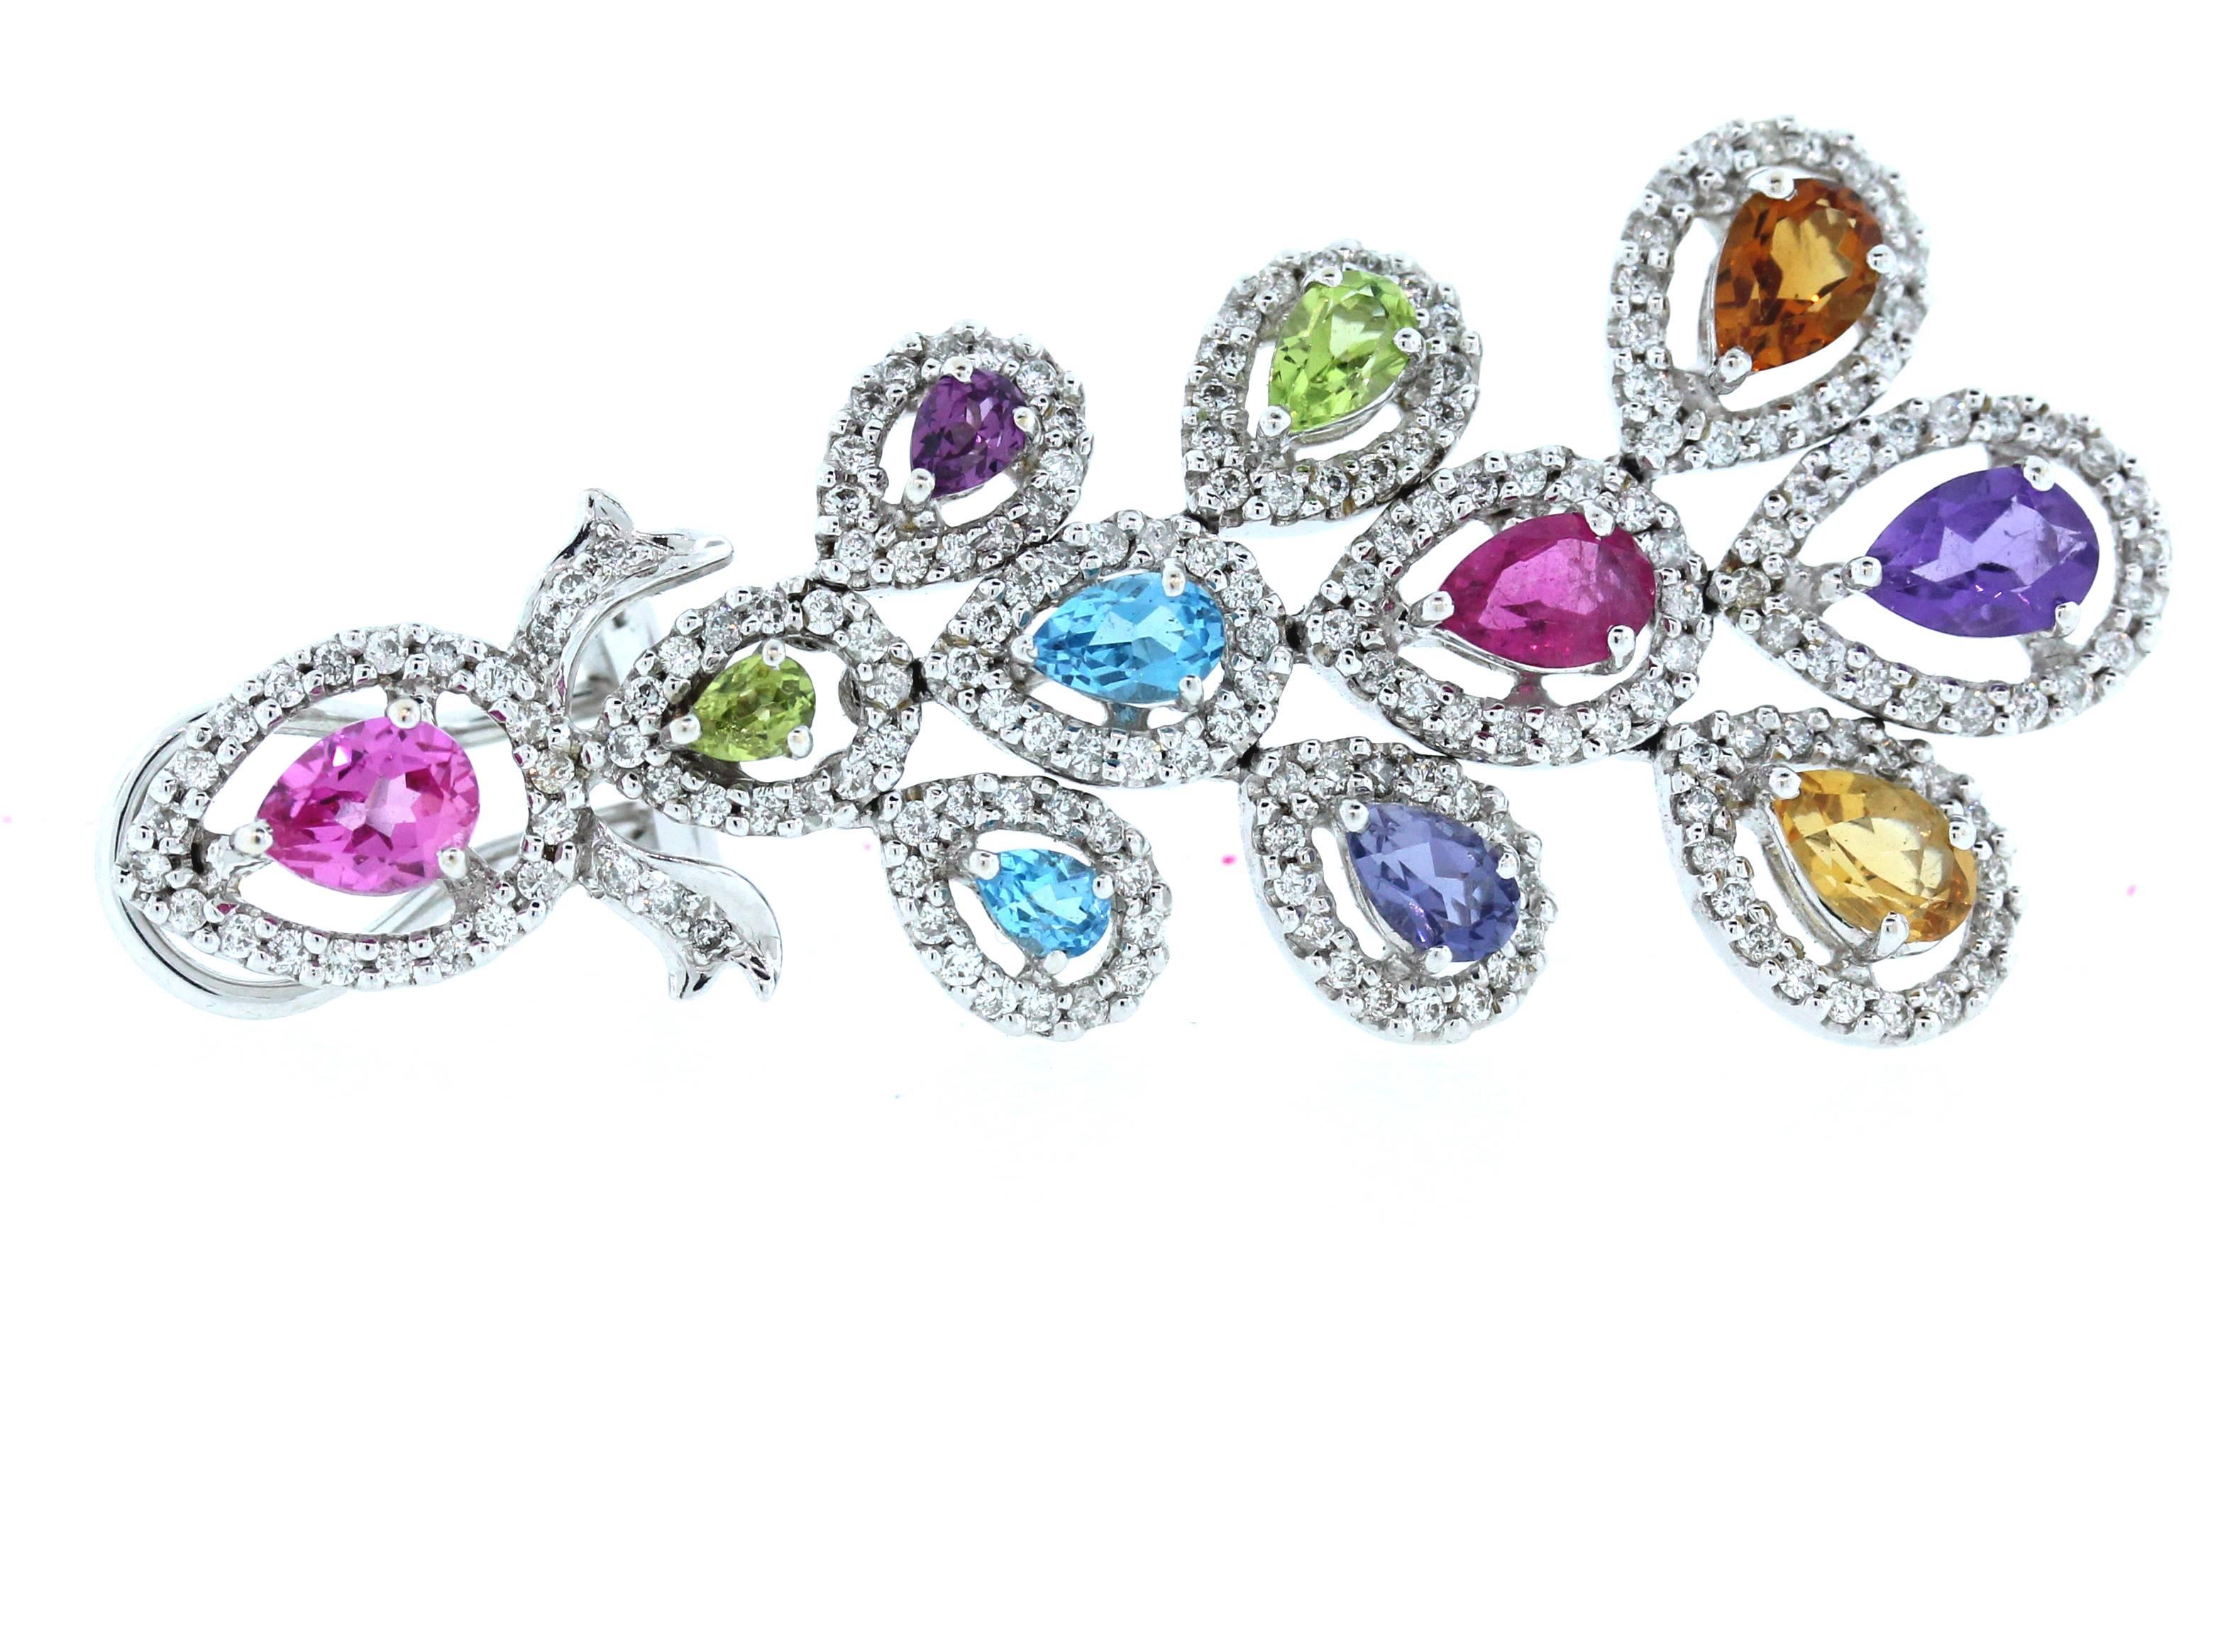 14K White Gold Earrings with Multi-Color Gemstones and Diamonds

Blue Topaz, Amethyst, Citrine, Peridot, Quartz. All Pear shapes

4.00ct. apprx. diamonds

2 inches length. 1 inch wide

Omega Backs used

Estate